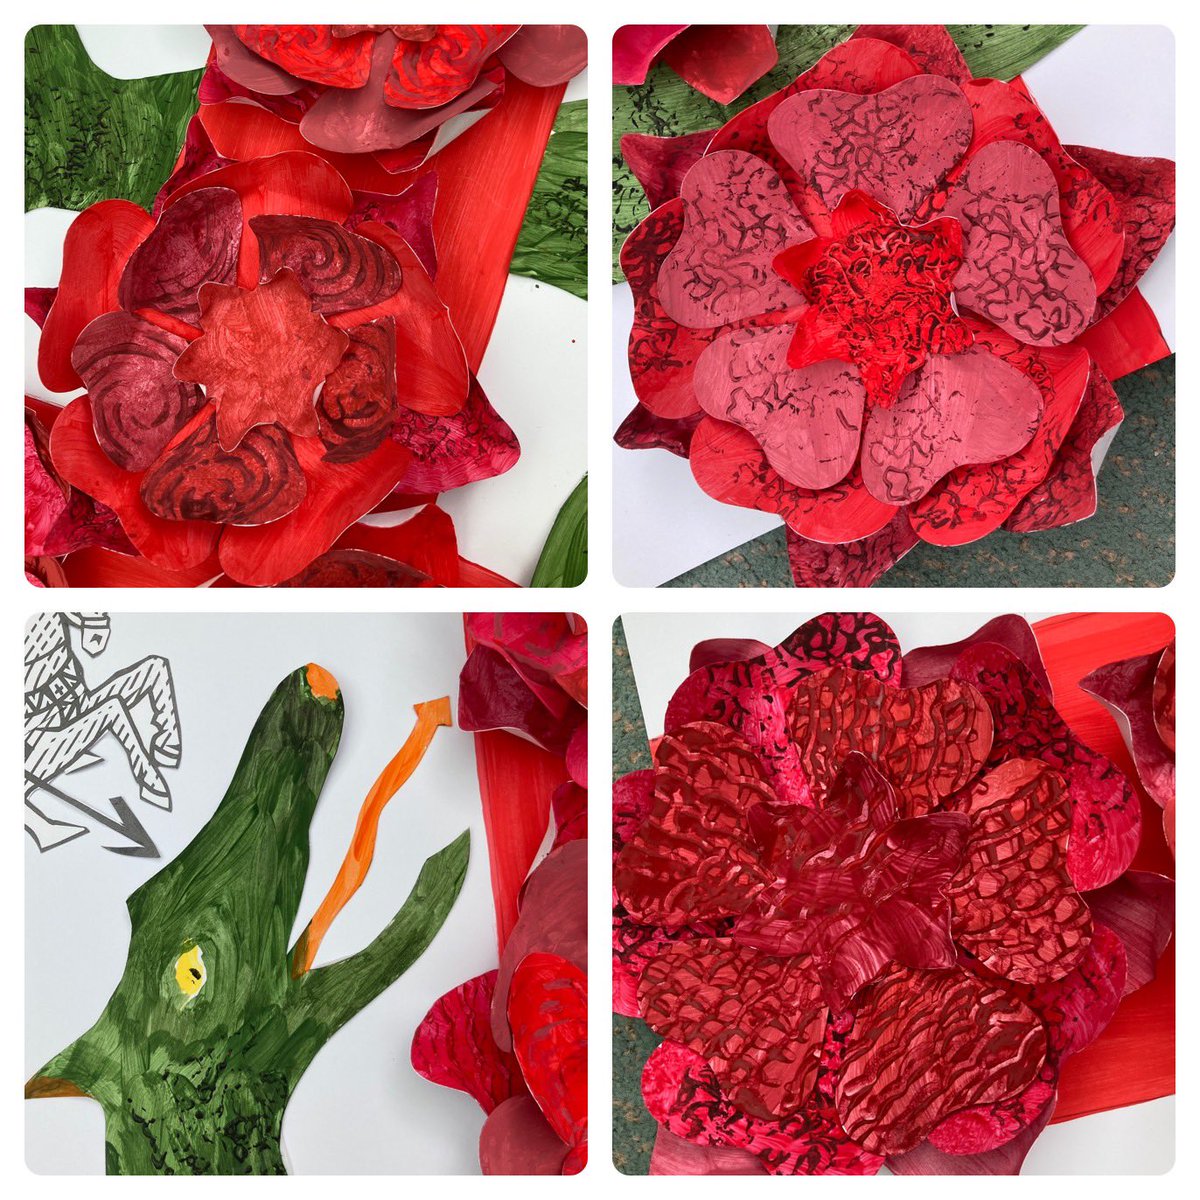 Happy #StGeorgesDay 🏴󠁧󠁢󠁥󠁮󠁧󠁿 

Lots of team work today at Falcon House CareHome. There were so many shapes that we had a production line (painting, stamping and even moulding the #roses!)

#creativemojo #dragon #CareHomeActivities #dementiafriendly #artsincarehomes #wellbeing